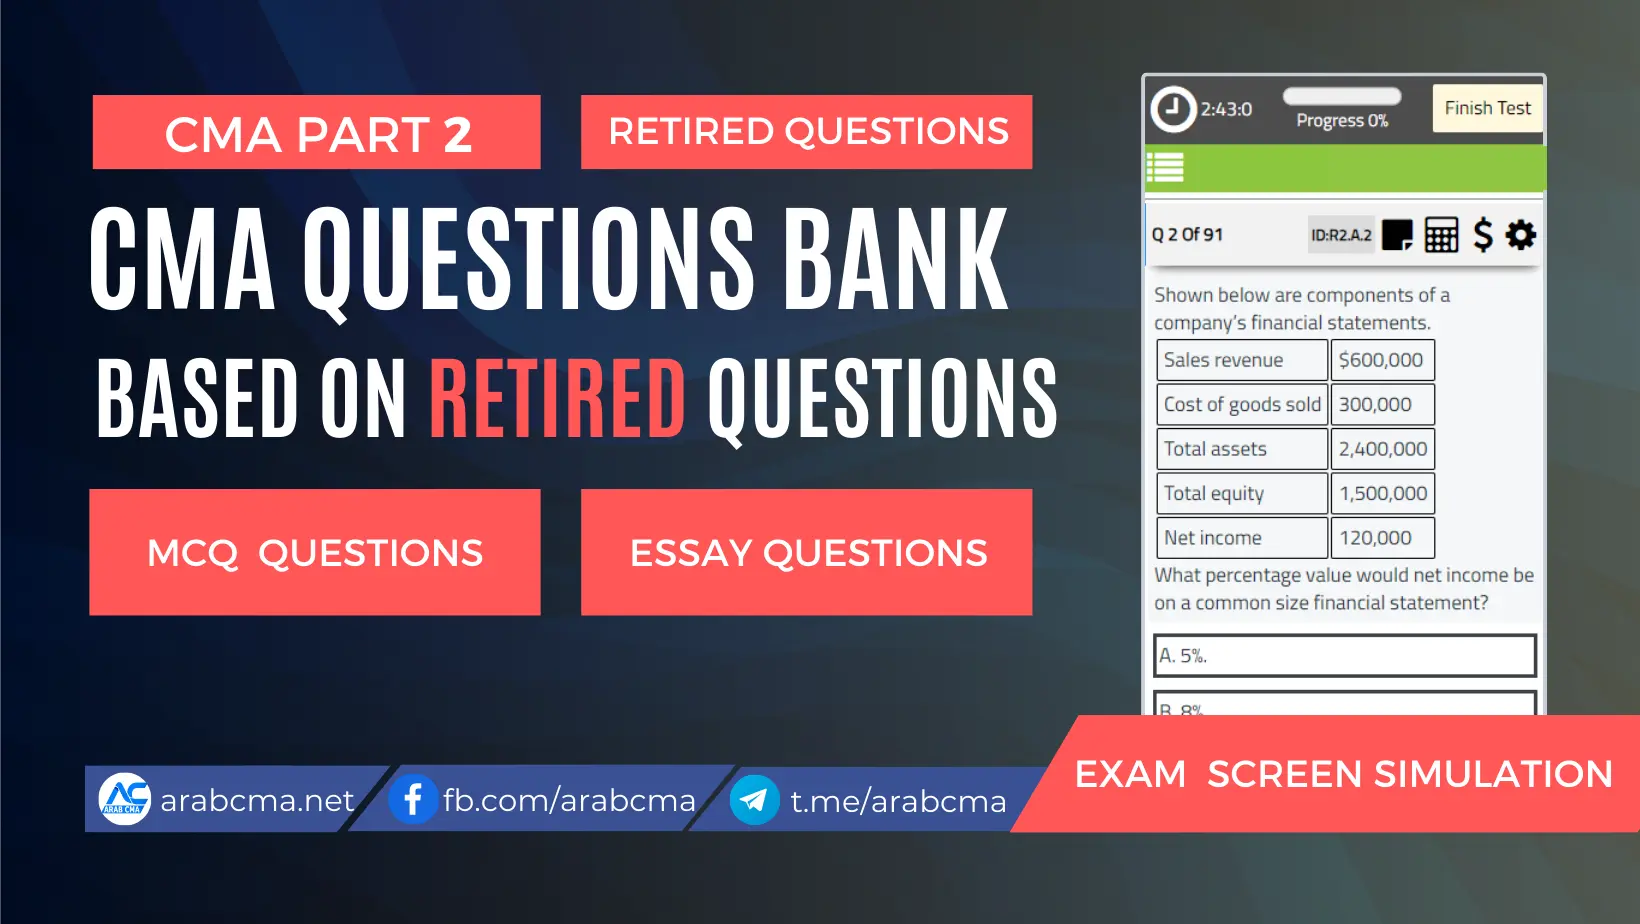 CMA PART 2 – RETIRED QUESTIONS BANK